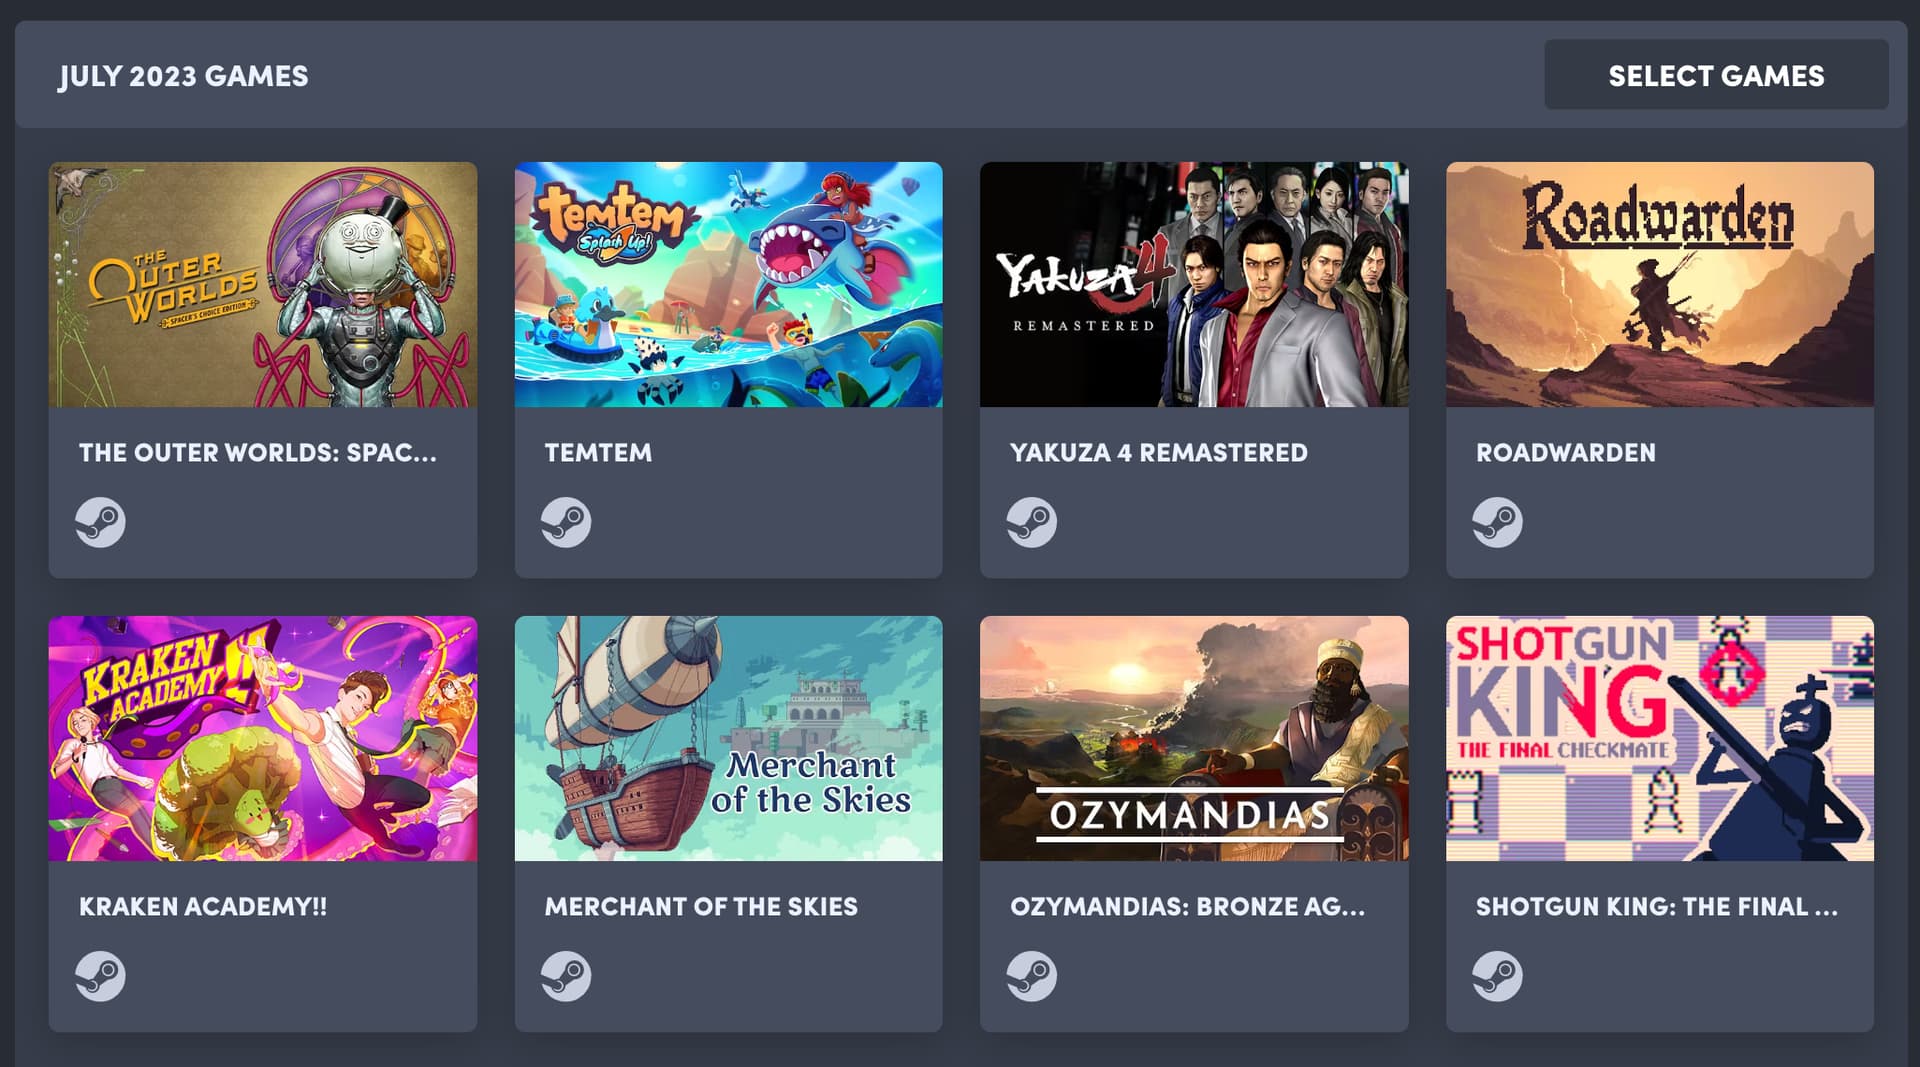 Humble Choice - How to Redeem Games – Humble Bundle